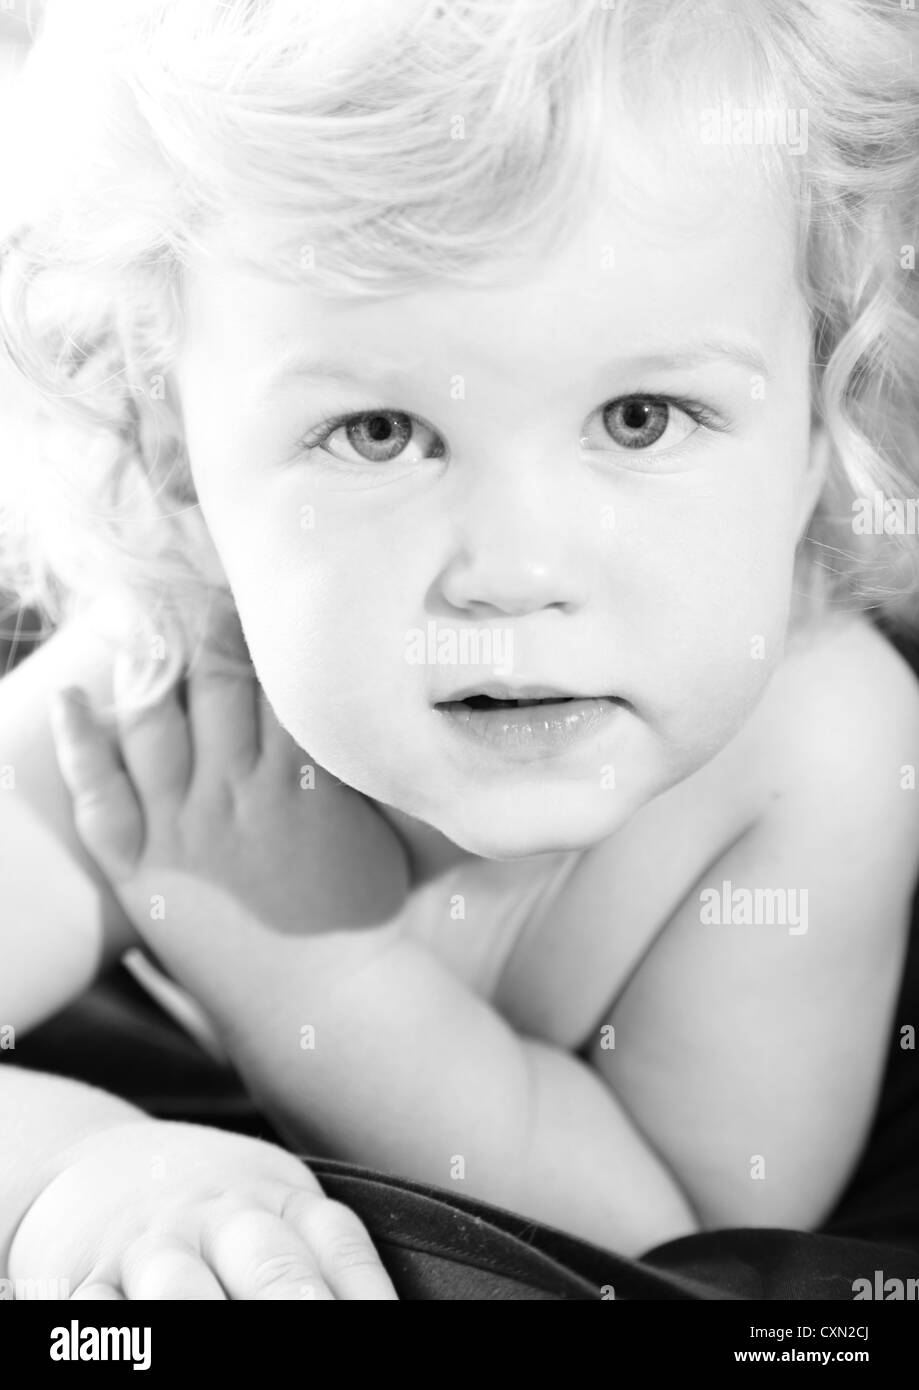 Cute Baby Boy With Curly Blond Hair Black And White Stock Photo